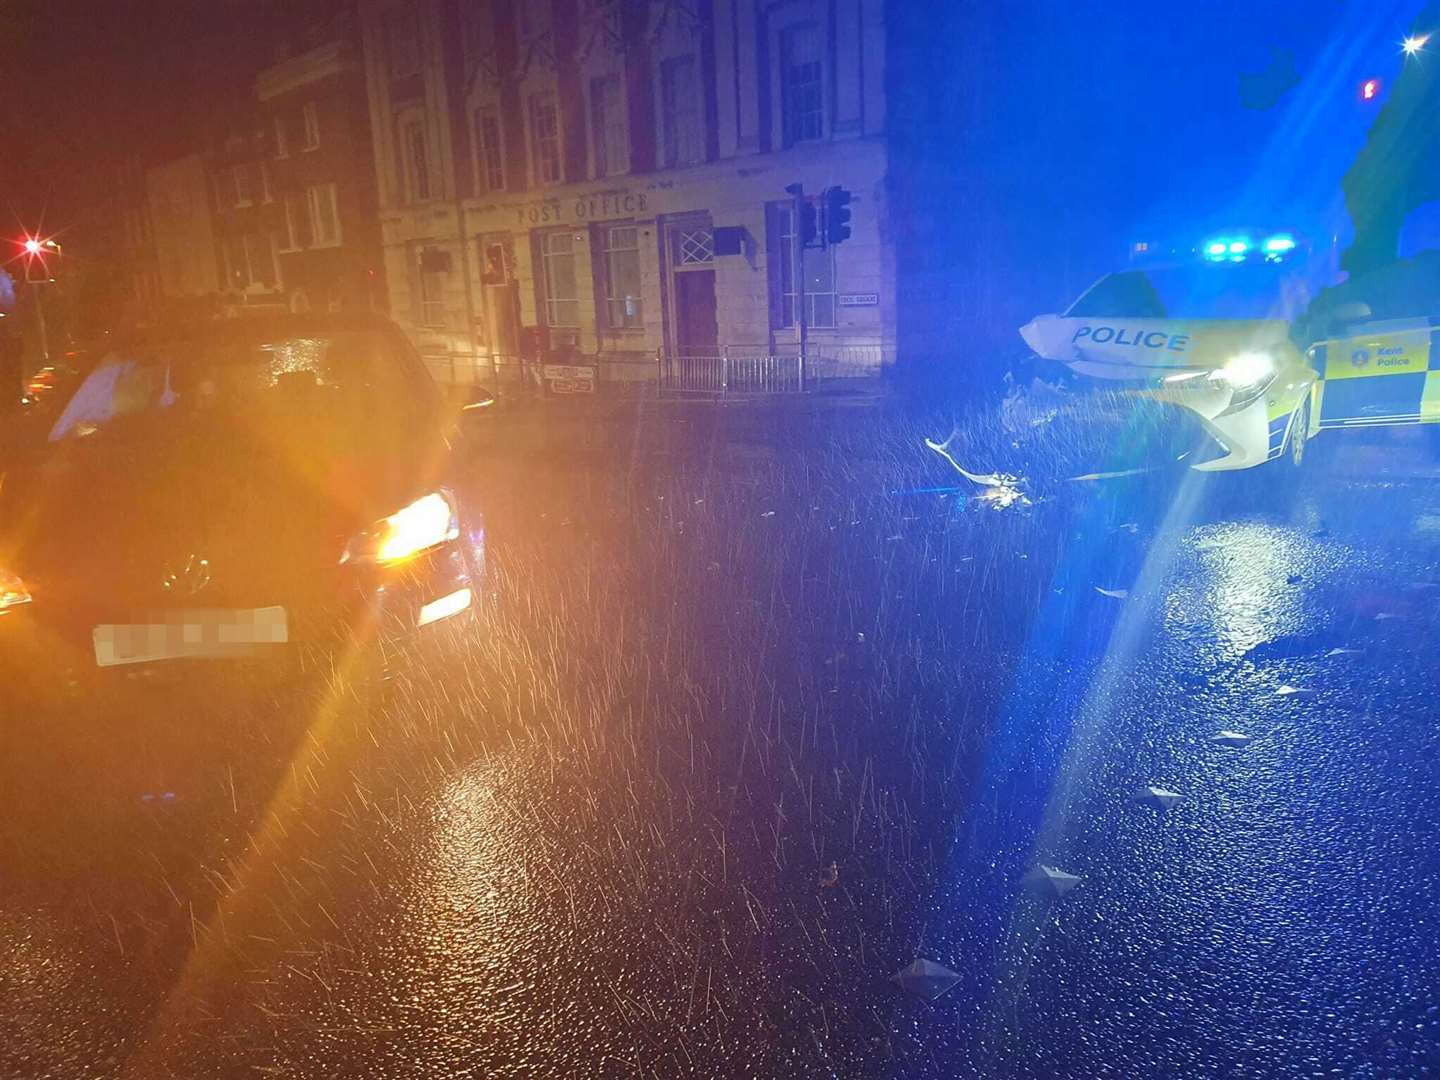 A police car was left badly damaged following a crash with another vehicle in Cecil Square, Margate